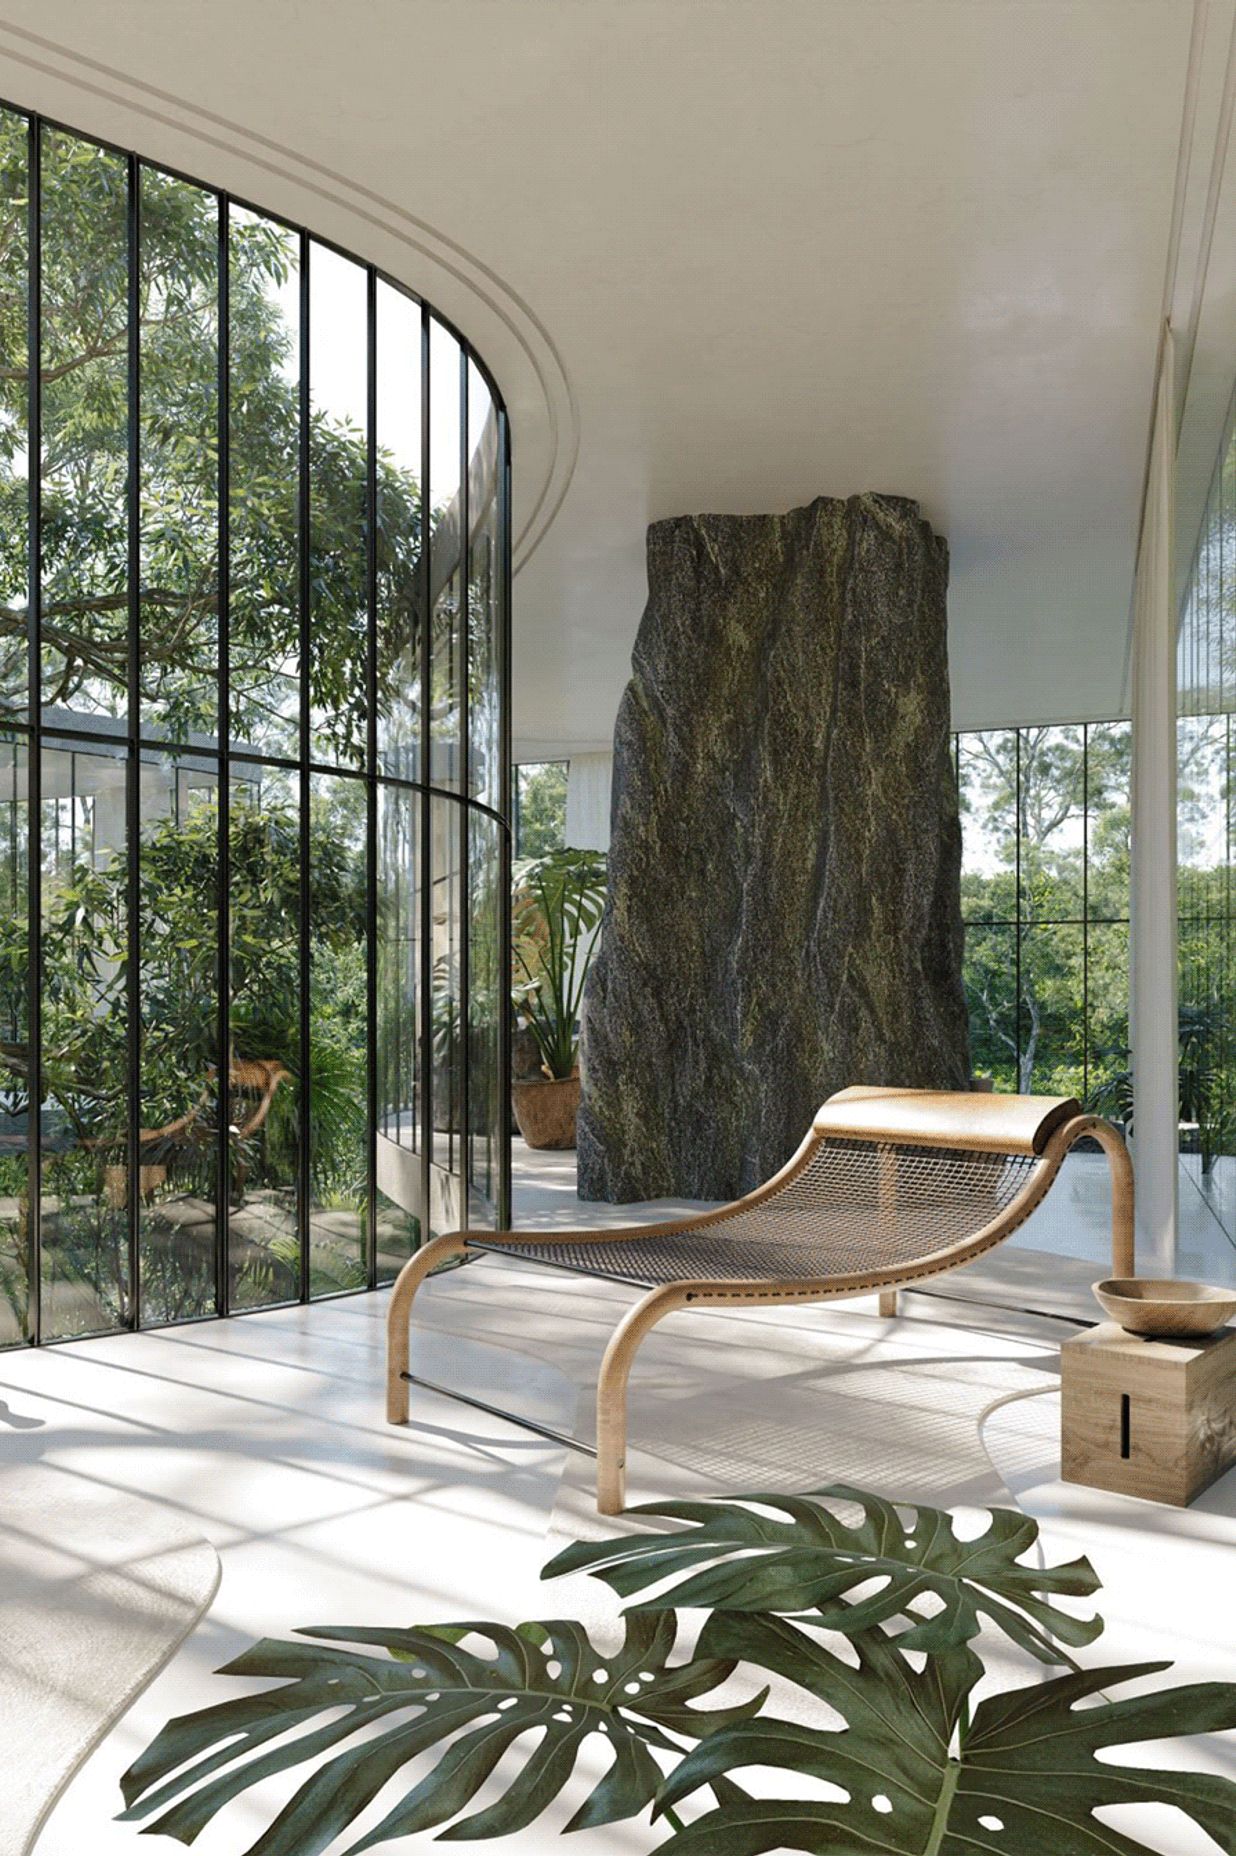 'Casa Atibaia', designed by Charlotte Taylor, in collaboration with Nicholas Preaud